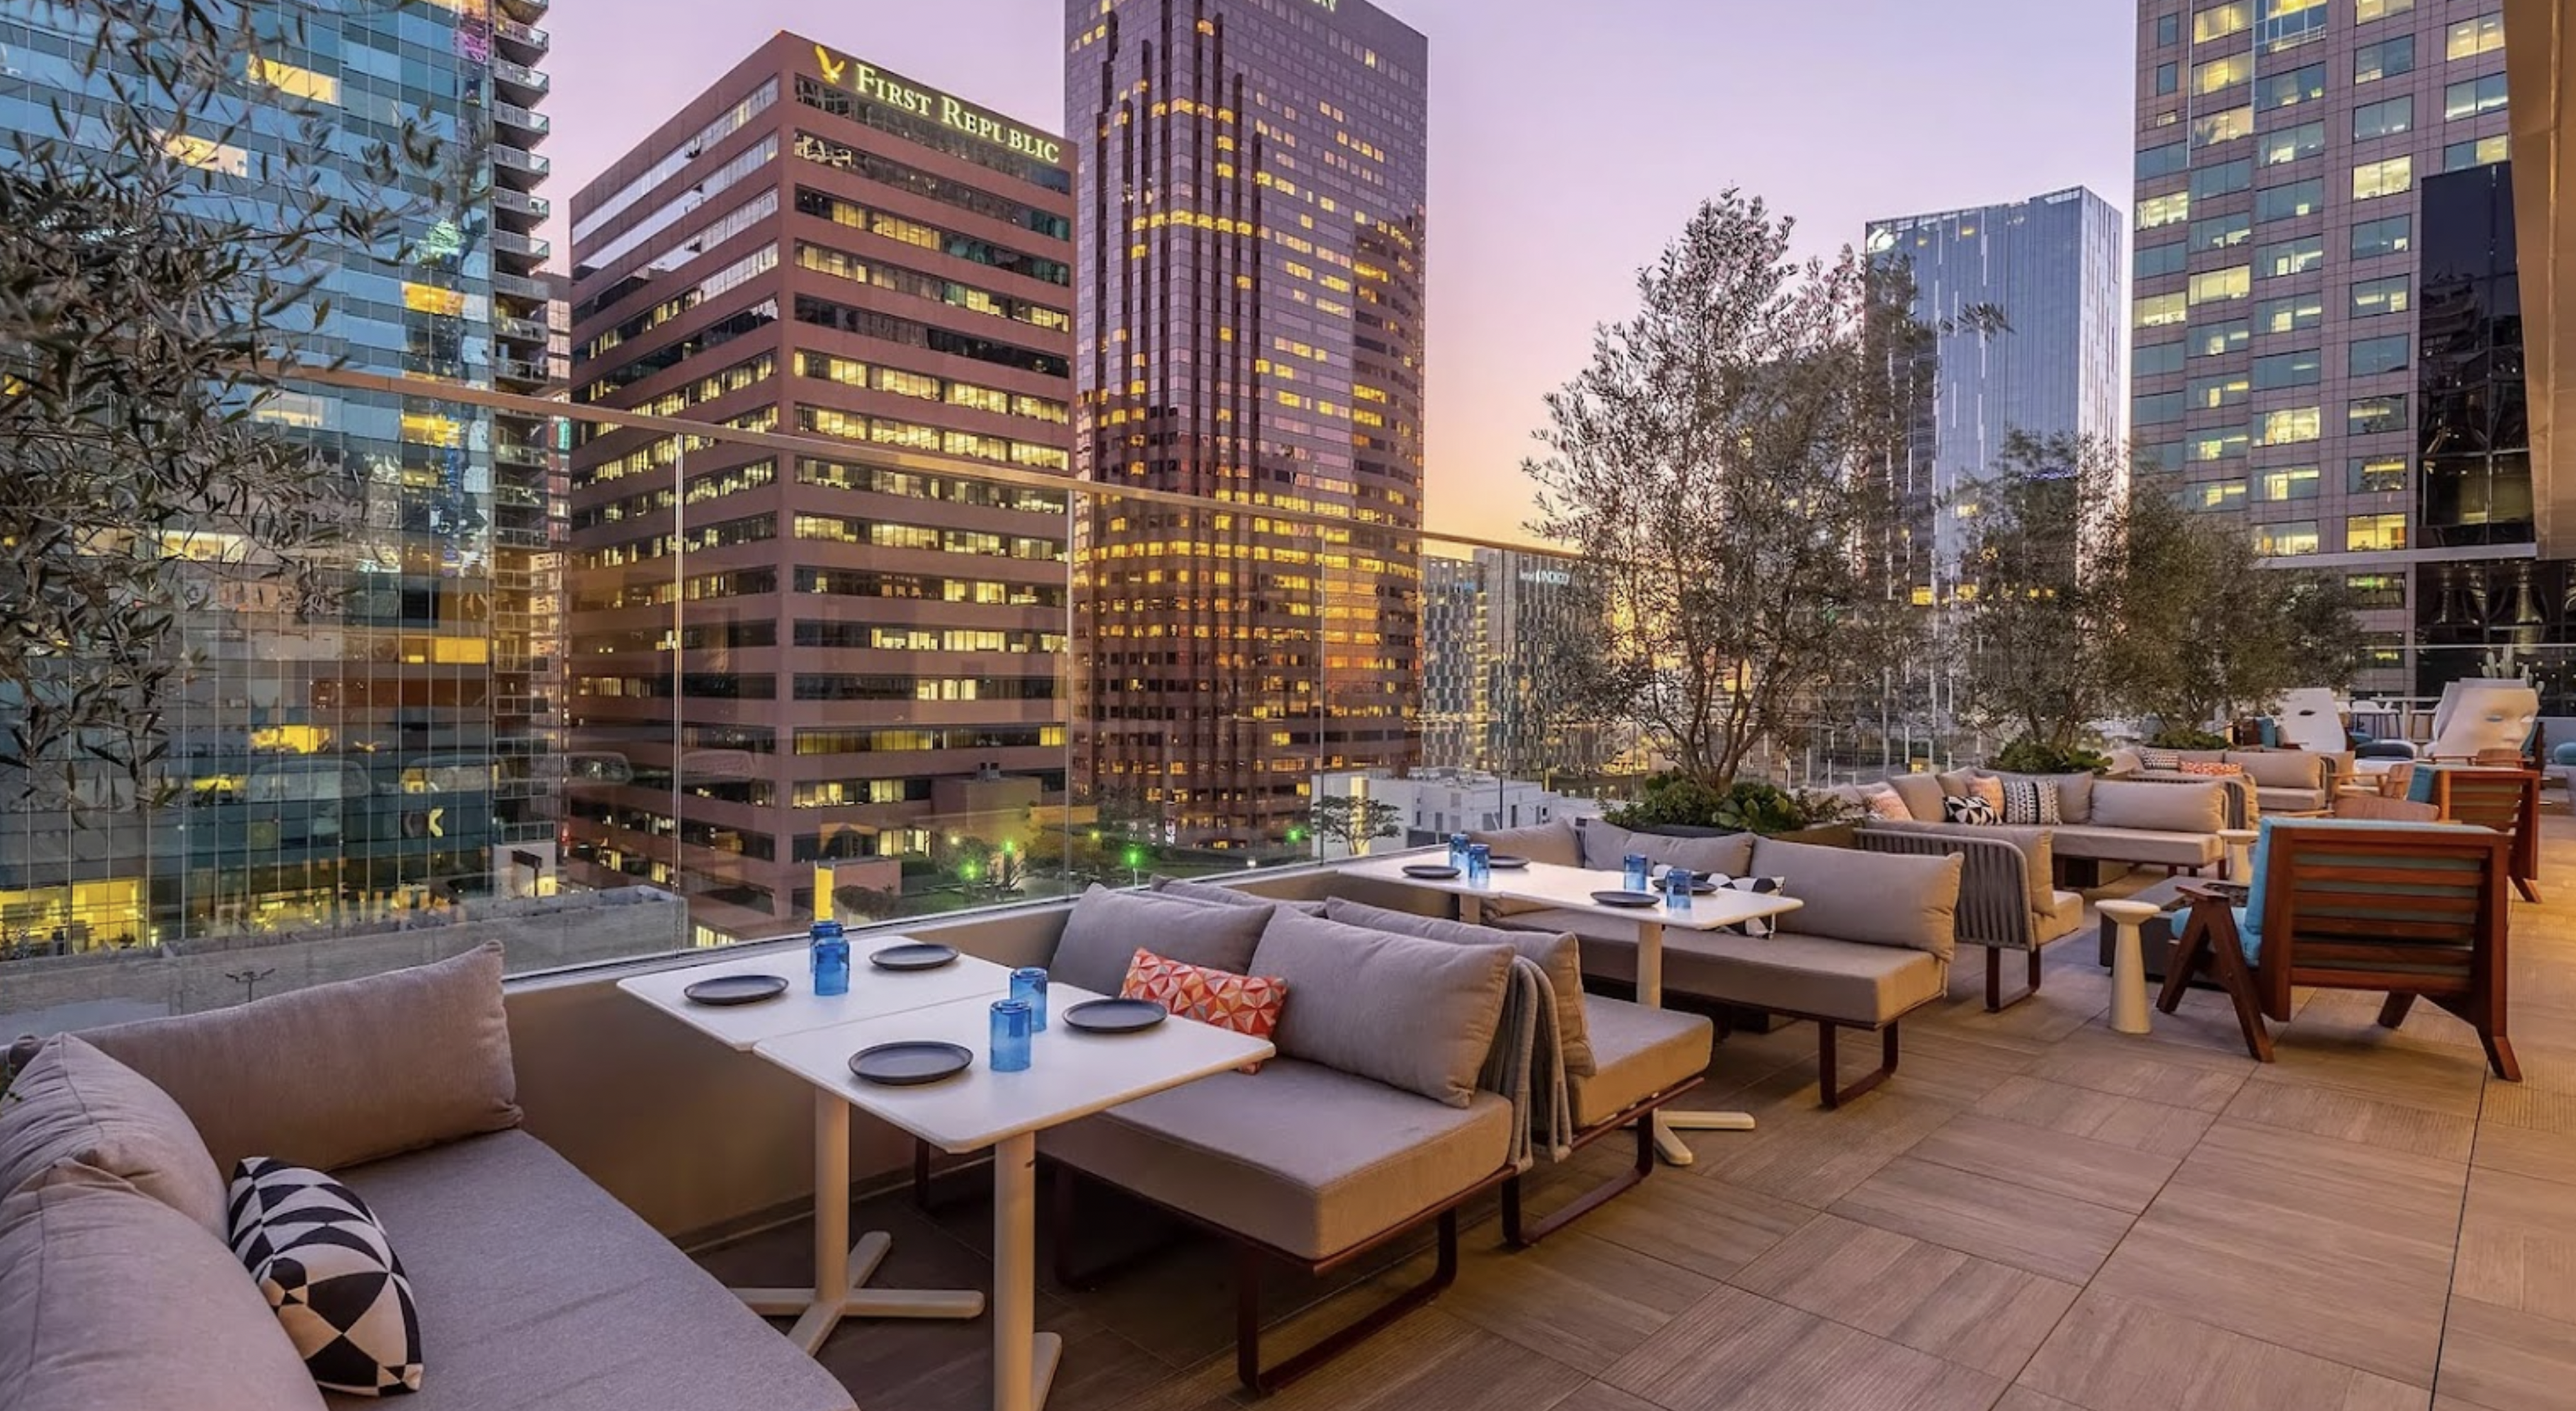 How to spend a weekend in downtown Los Angeles